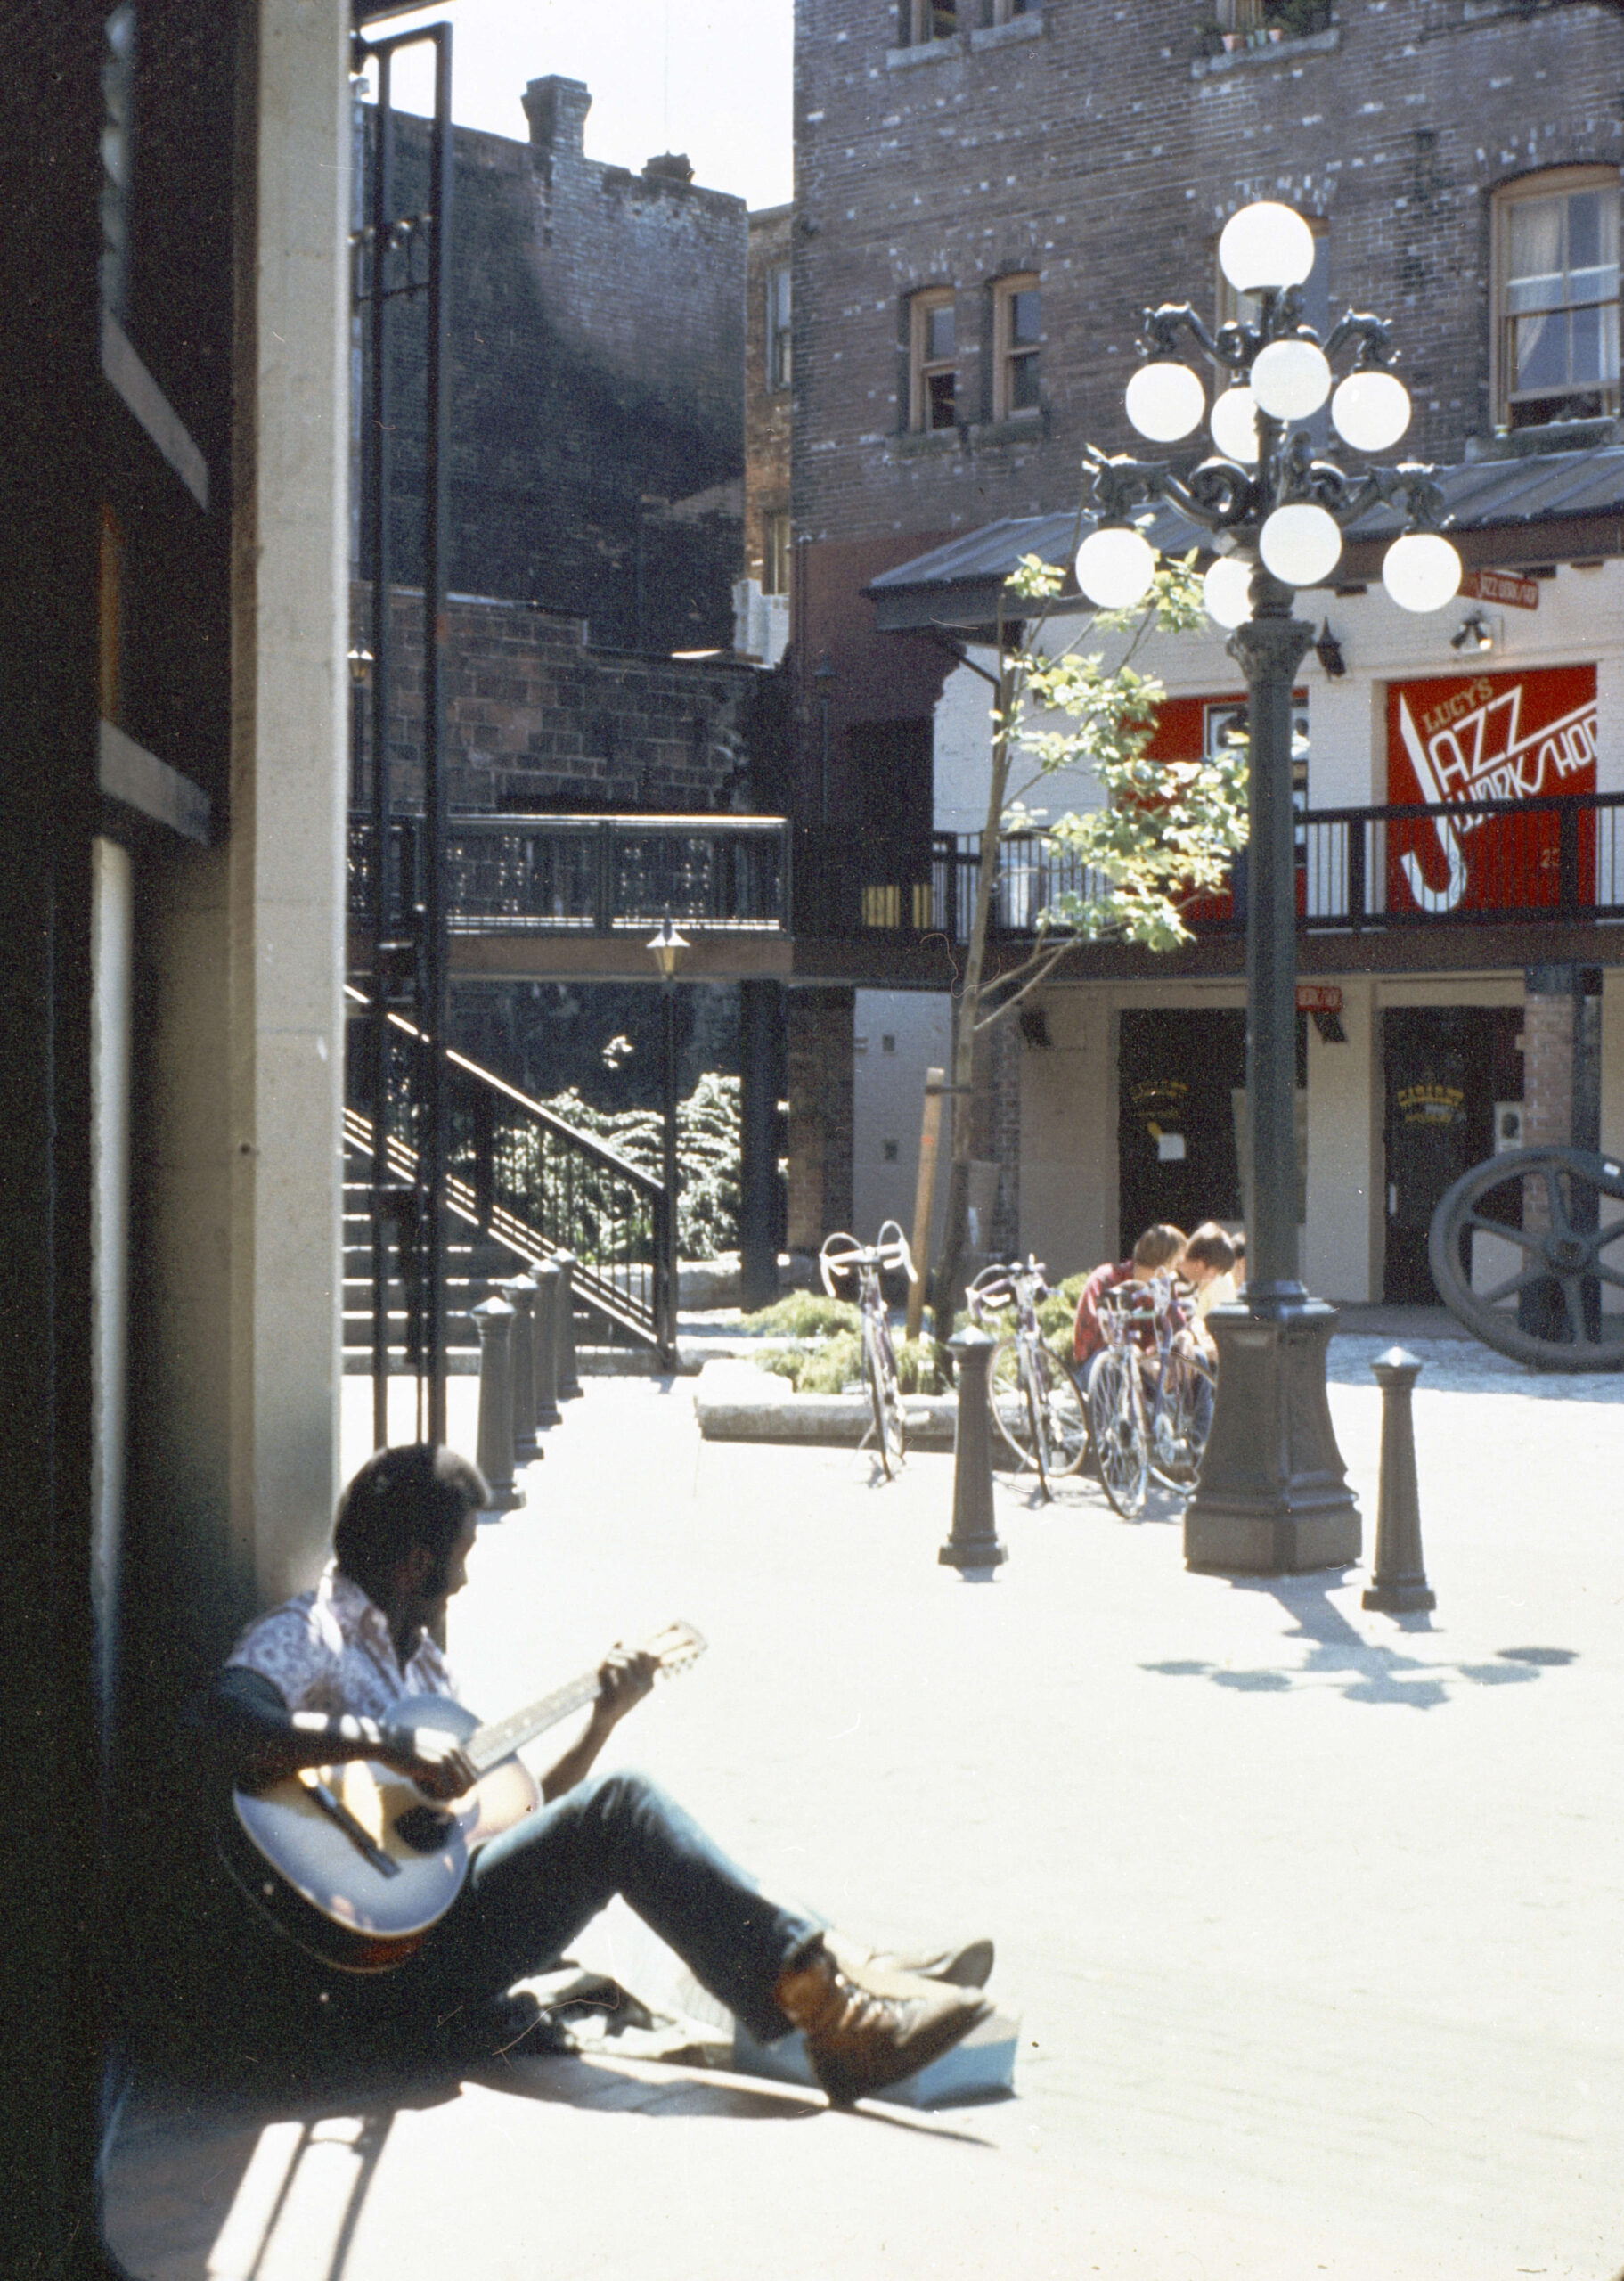 Man playing guitar in Blood Alley Square. Reference code: COV-S644-: CVA 1095-13344